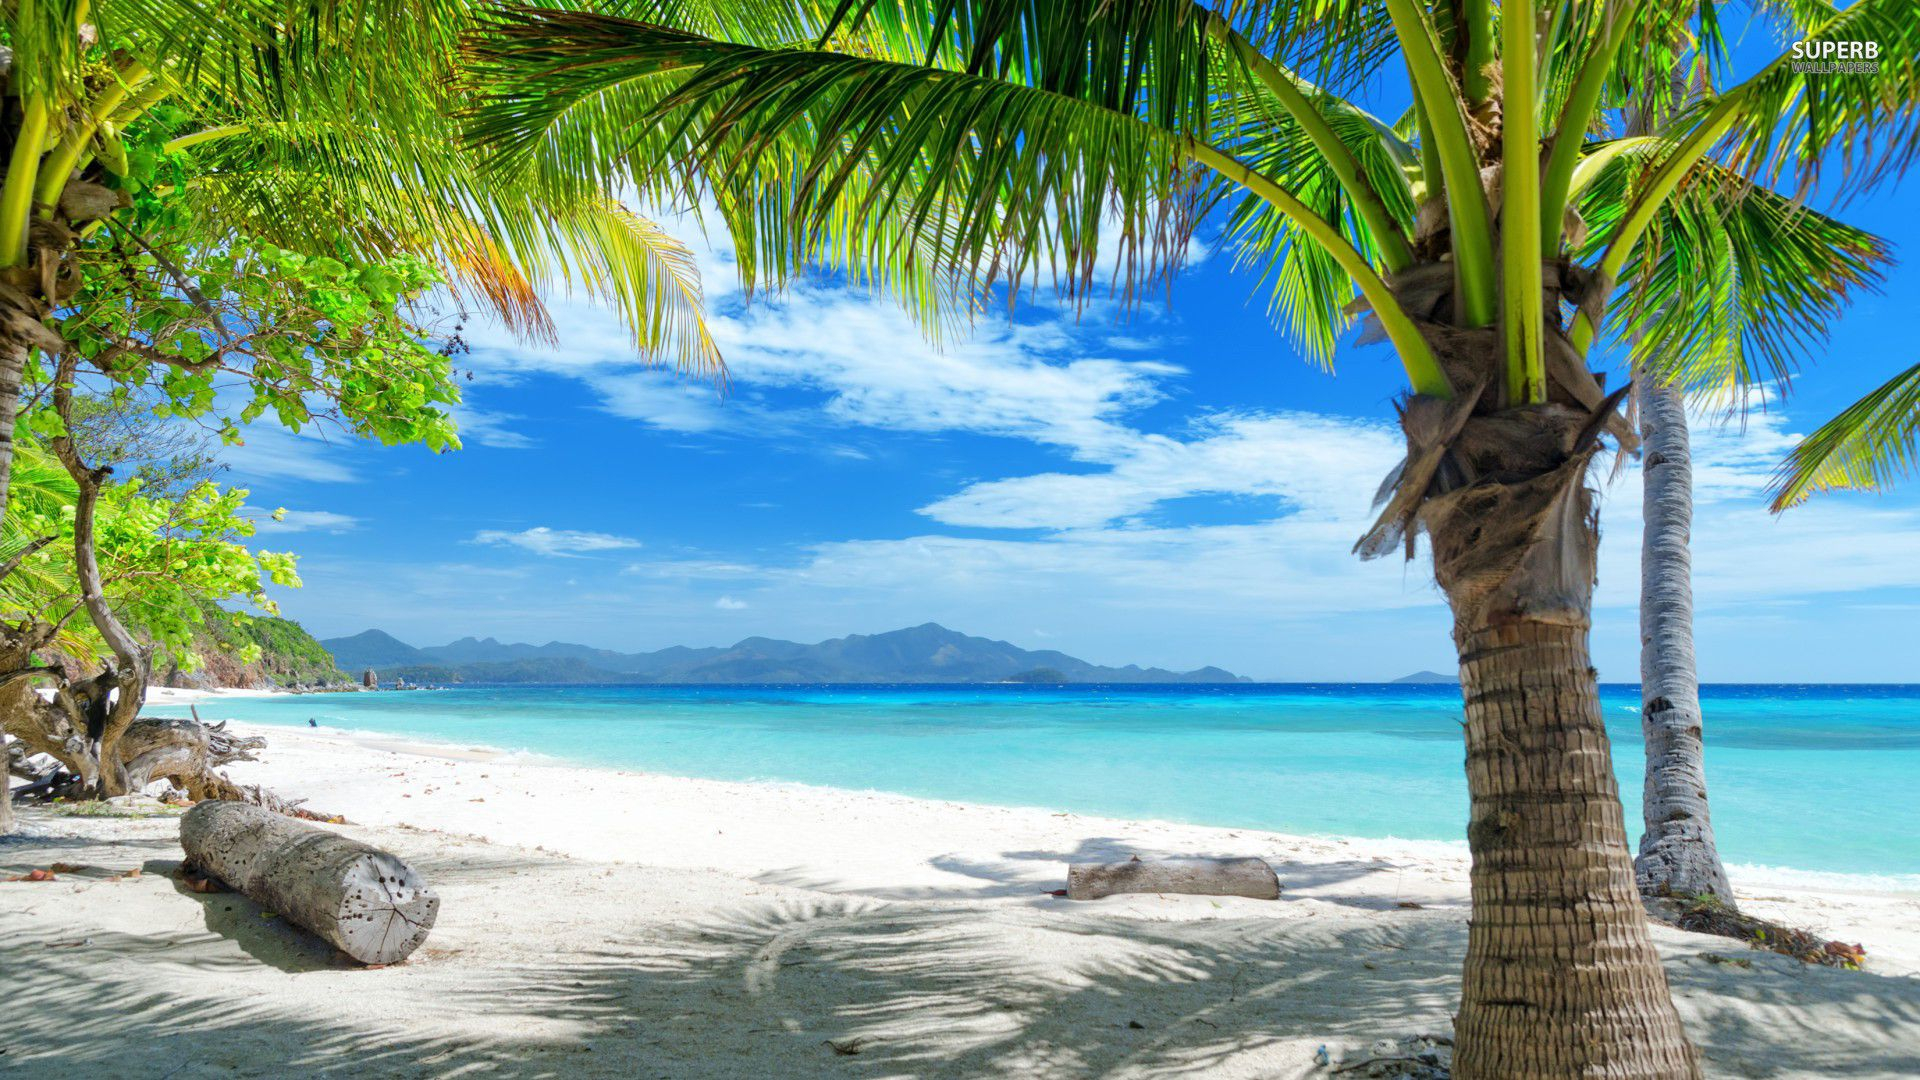 1920x1080 Tropical Beach Scenes Wallpapers Top Free Tropical Beach Scenes Backgrounds